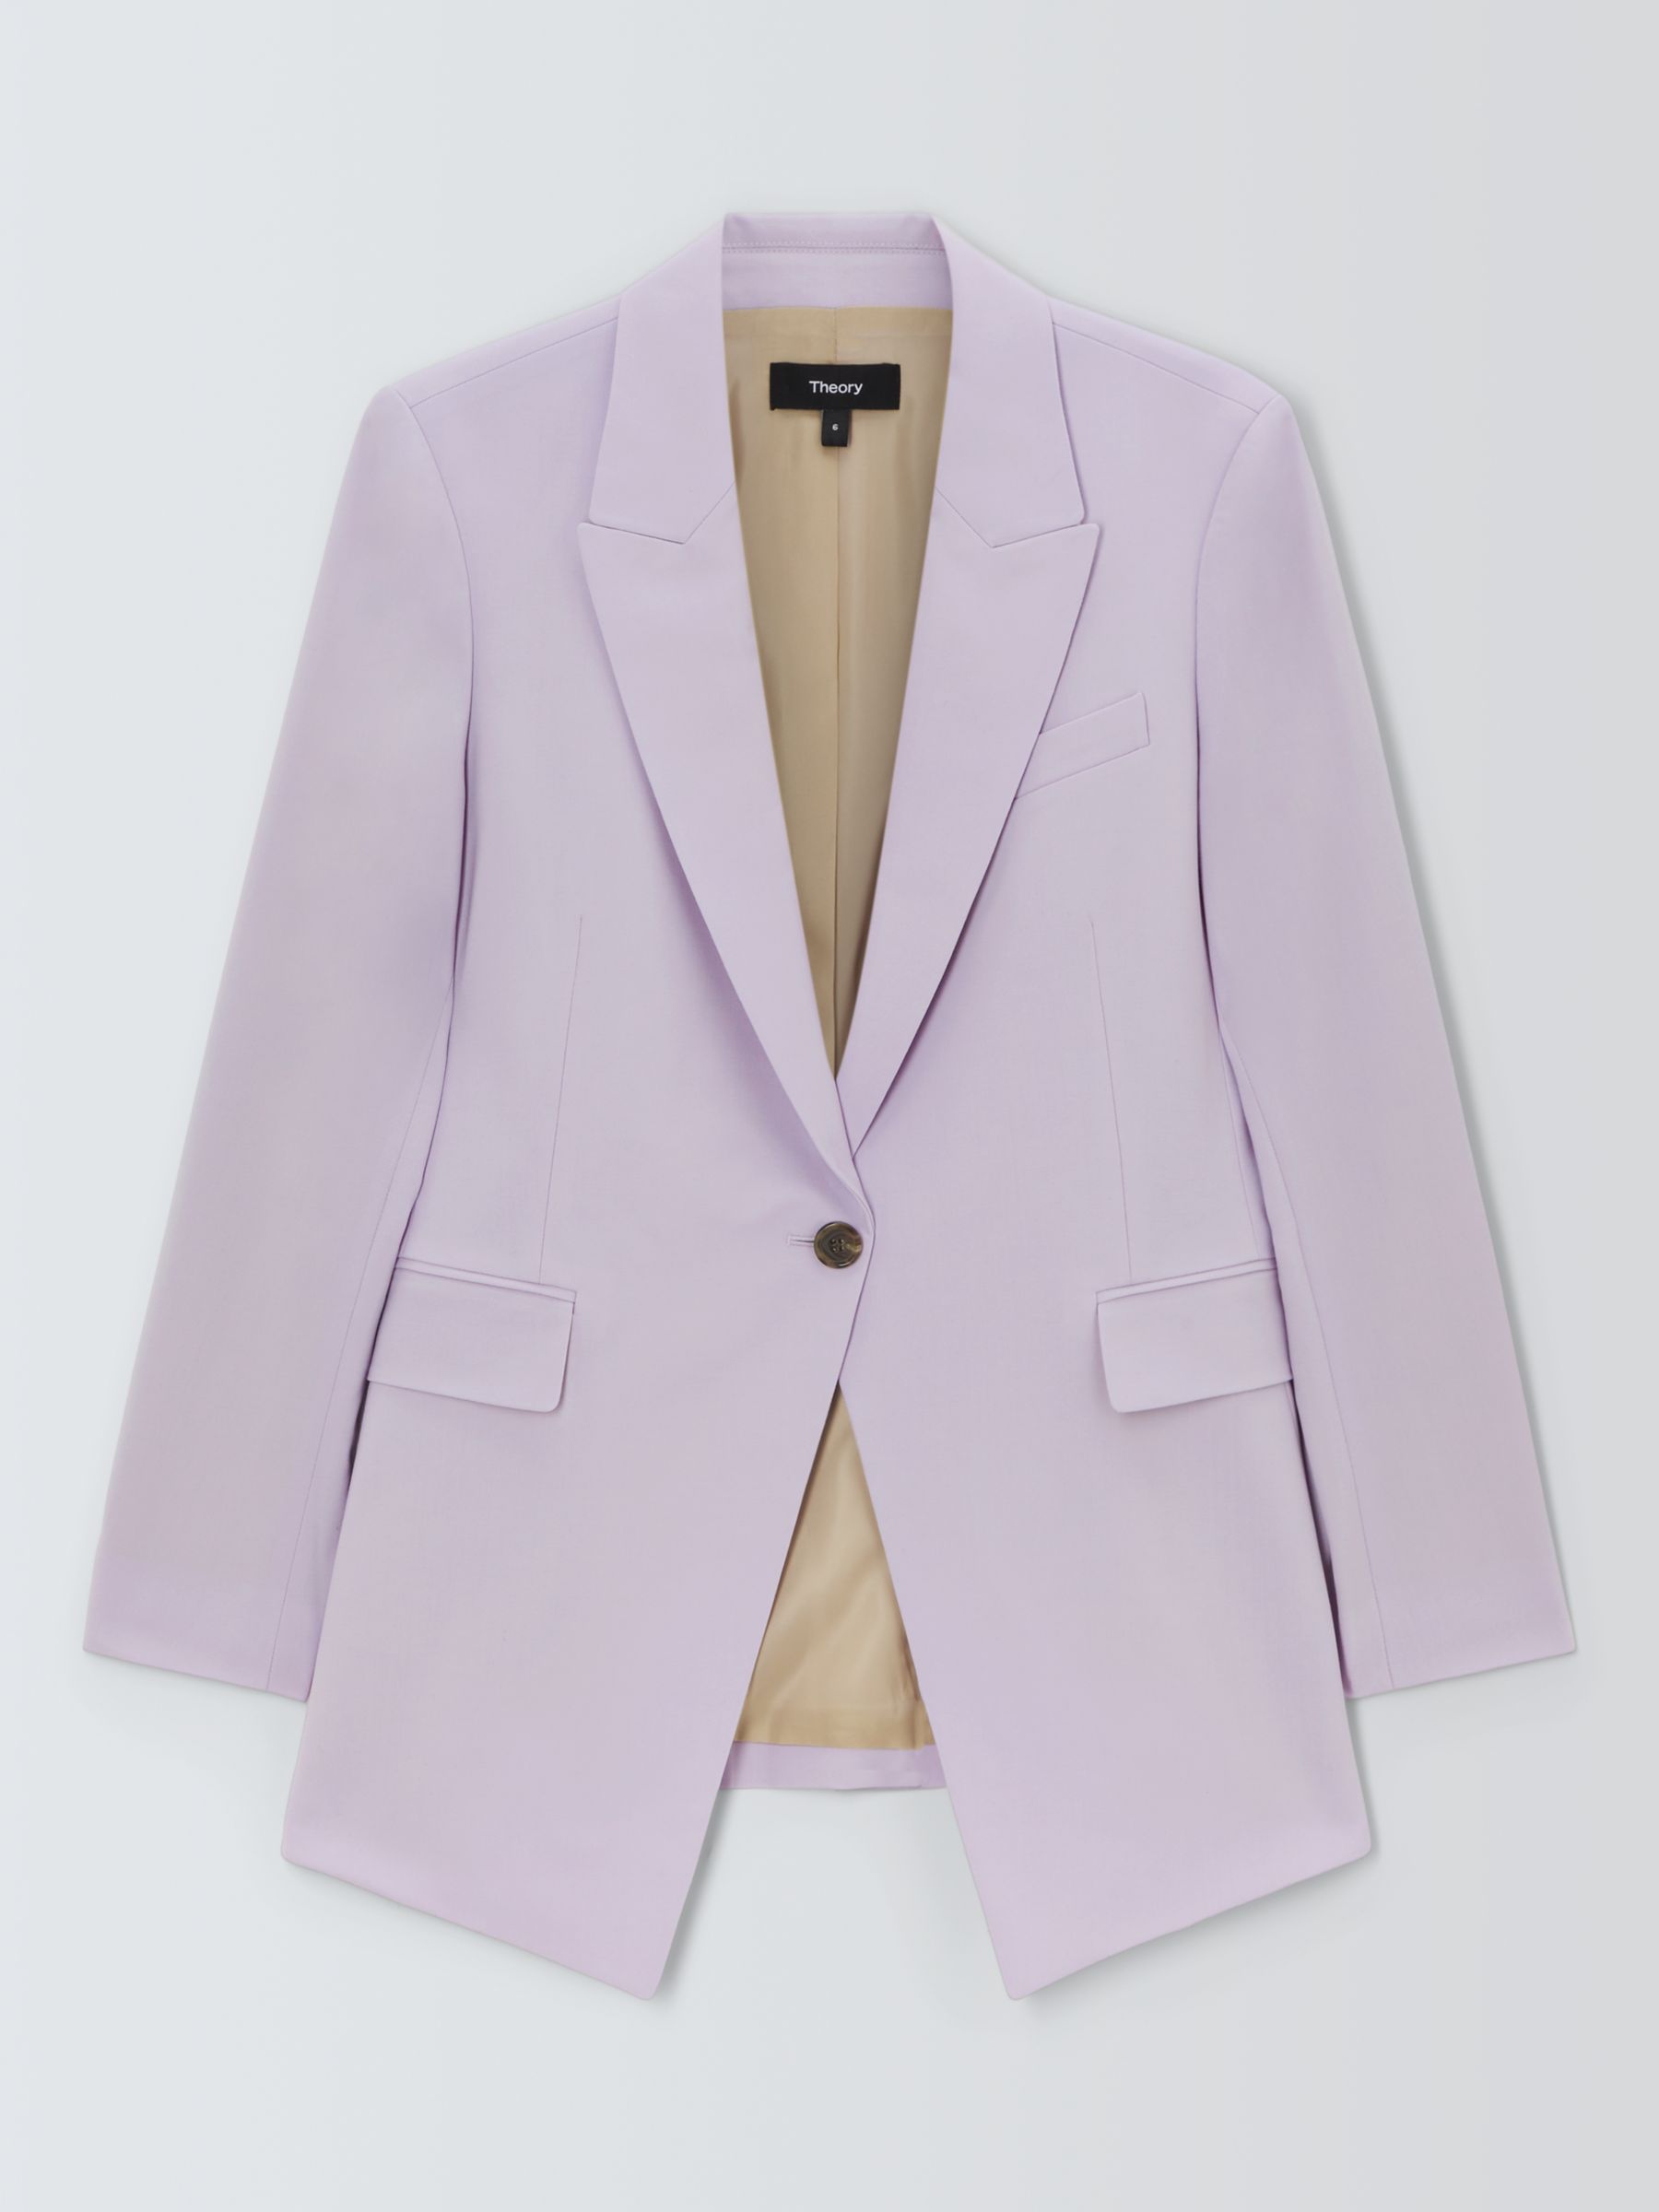 Buy Theory Etiennette Wool Blend Blazer, Lilac Online at johnlewis.com